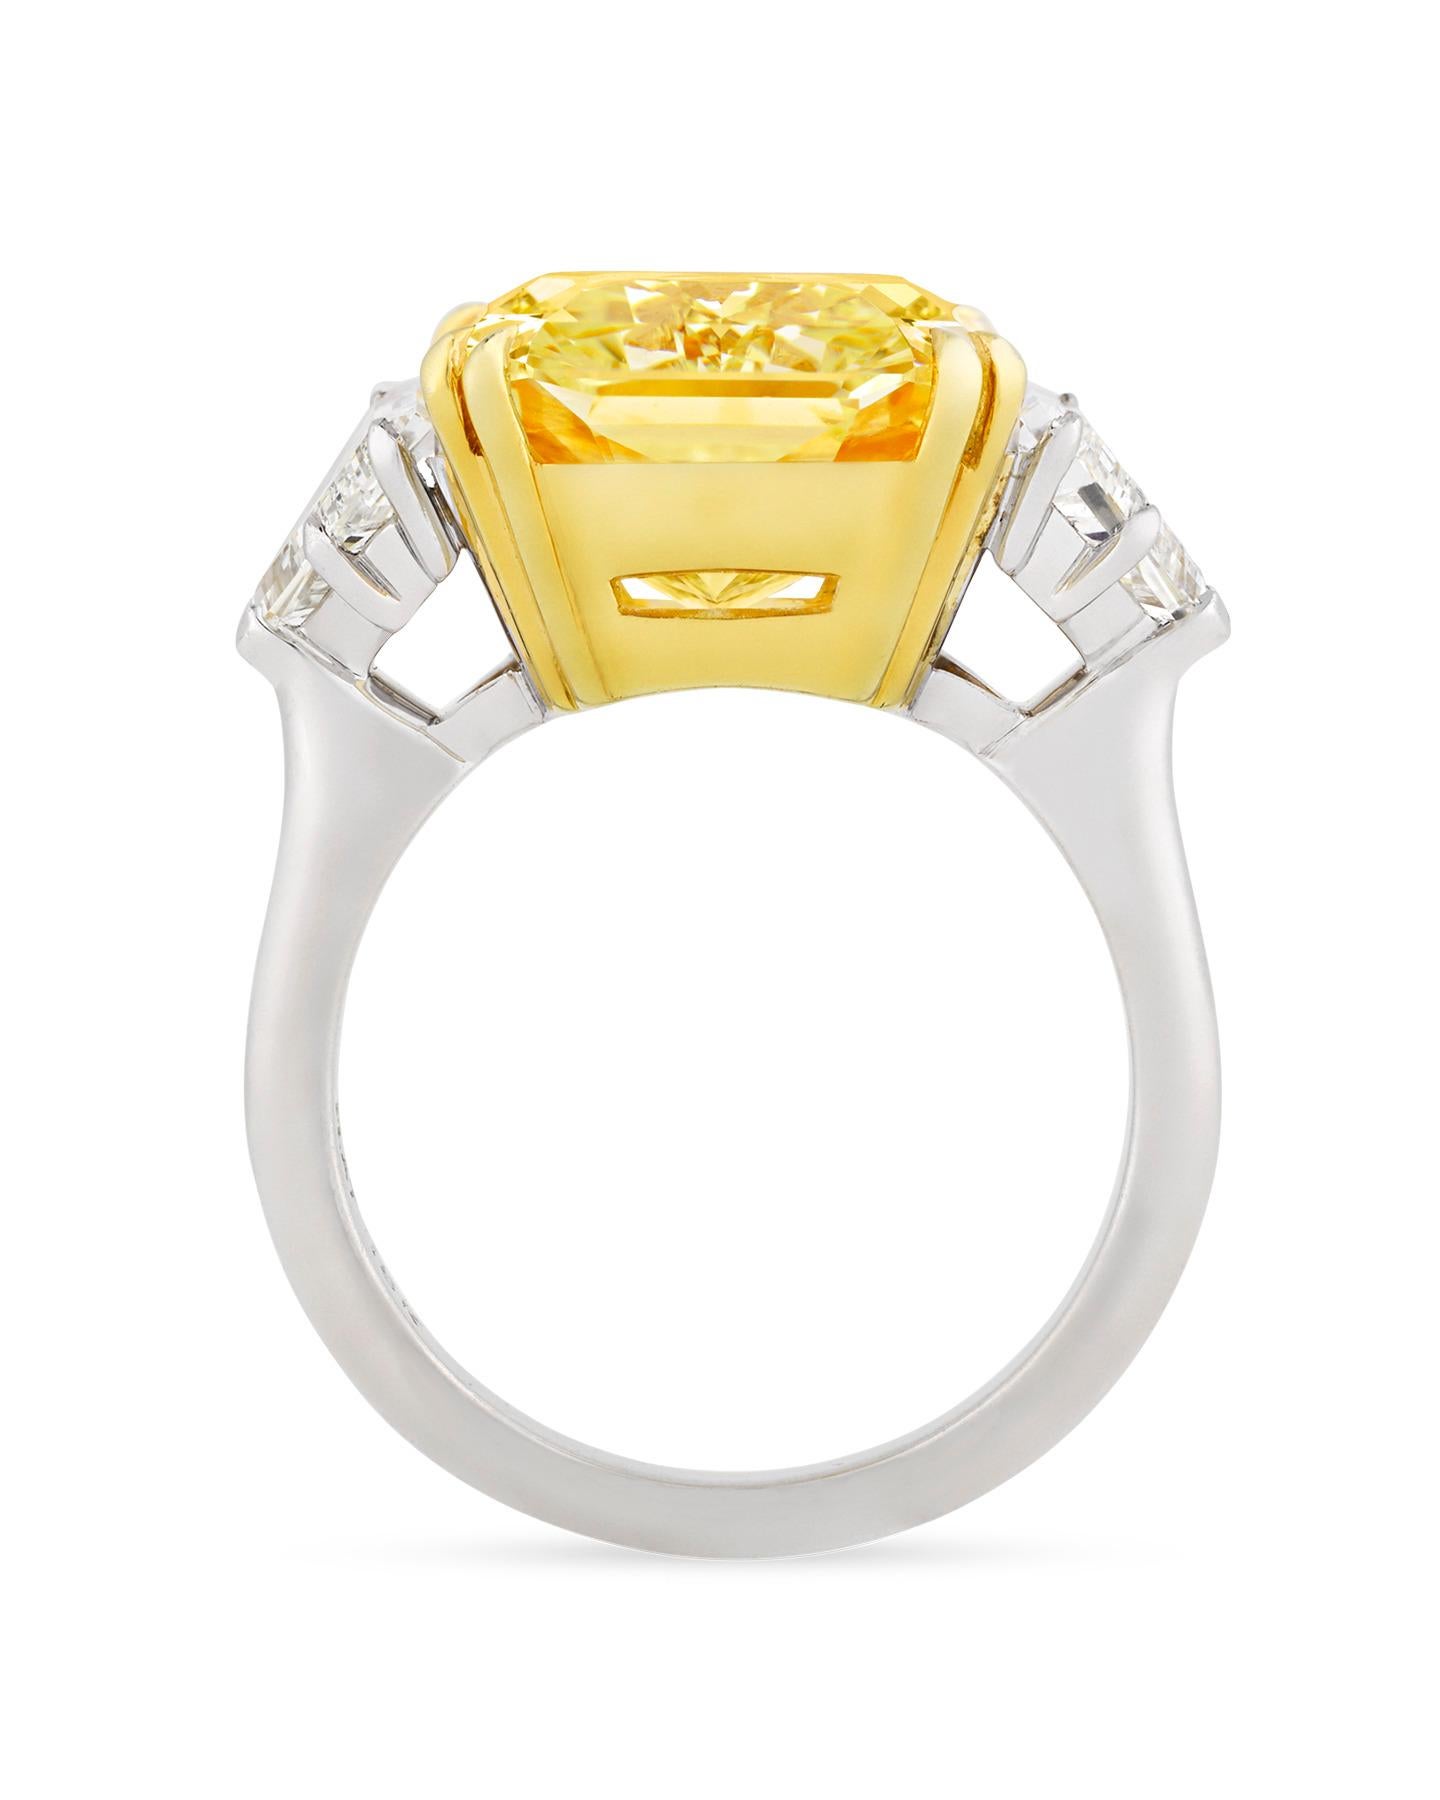 A dazzling 10.67-carat fancy yellow diamond is set in this impressive ring. The rare gemstone is certified by the Gemological Institute of America (GIA) as being an entirely untreated 